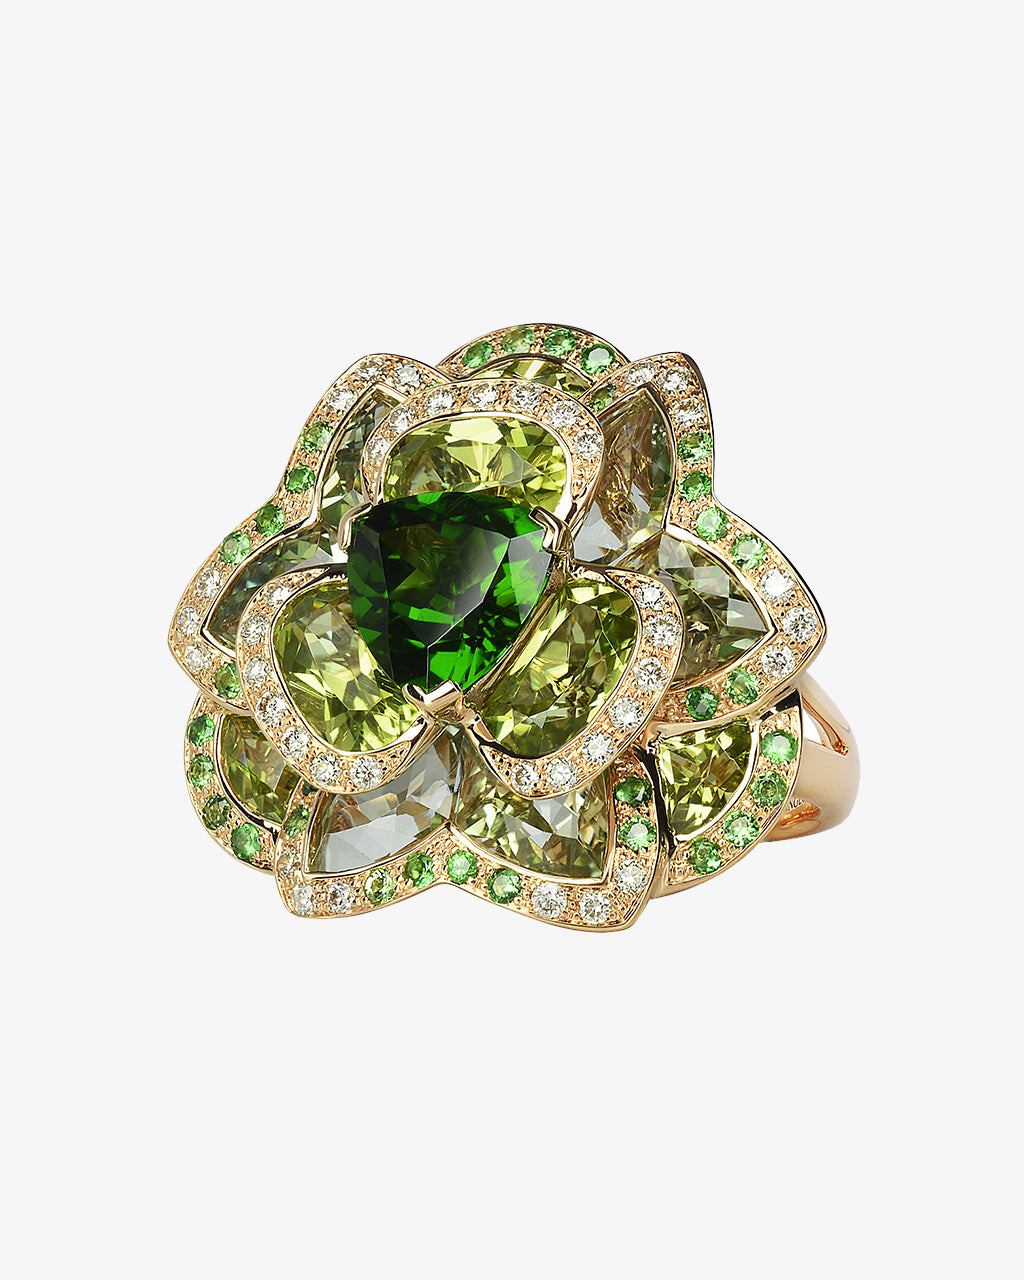 Isabelle Langlois Peridot Multi Stone and Diamond Ring